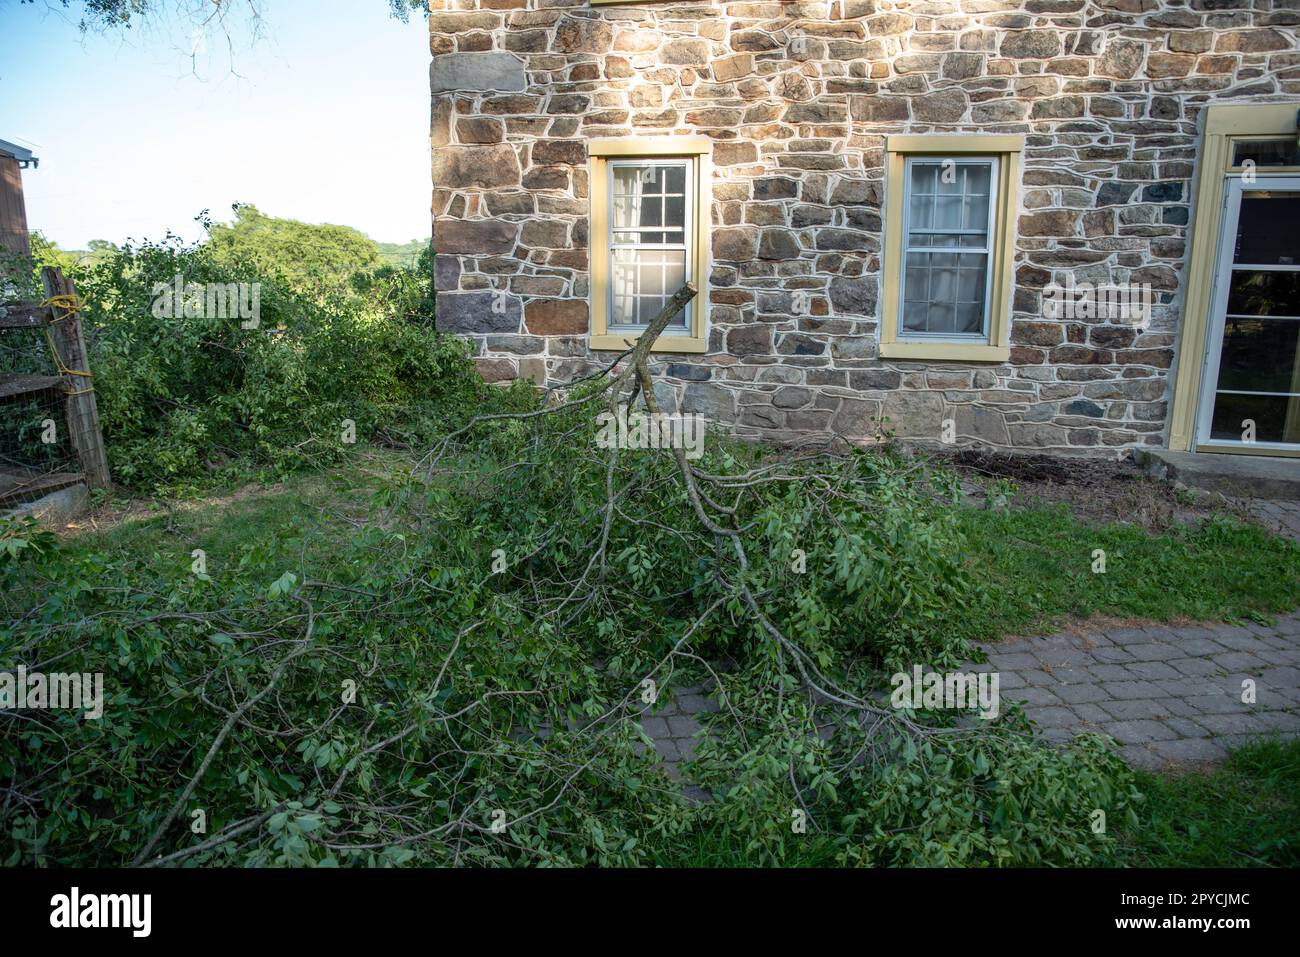 Cut tree branches with leaves in the front yard of an old stone house. Stock Photo